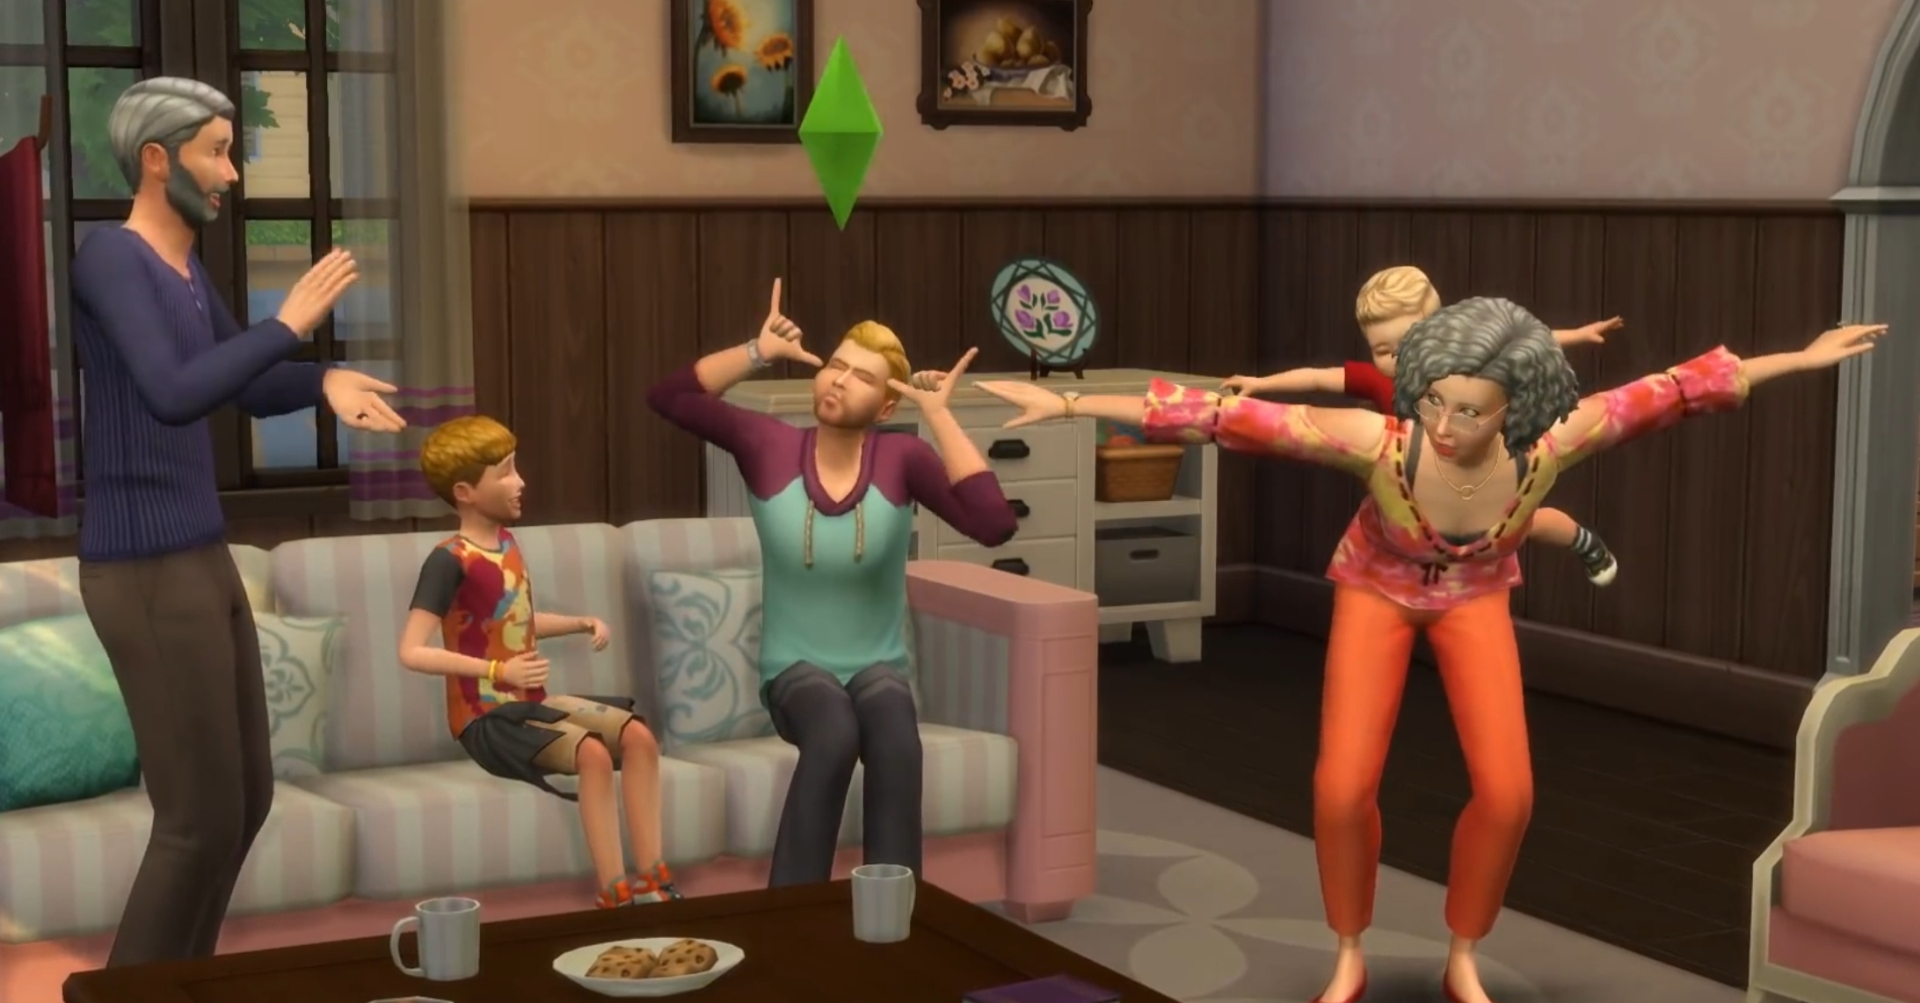 The Sims 4 Parenthood Game Pack: Guides, Features & Pictures